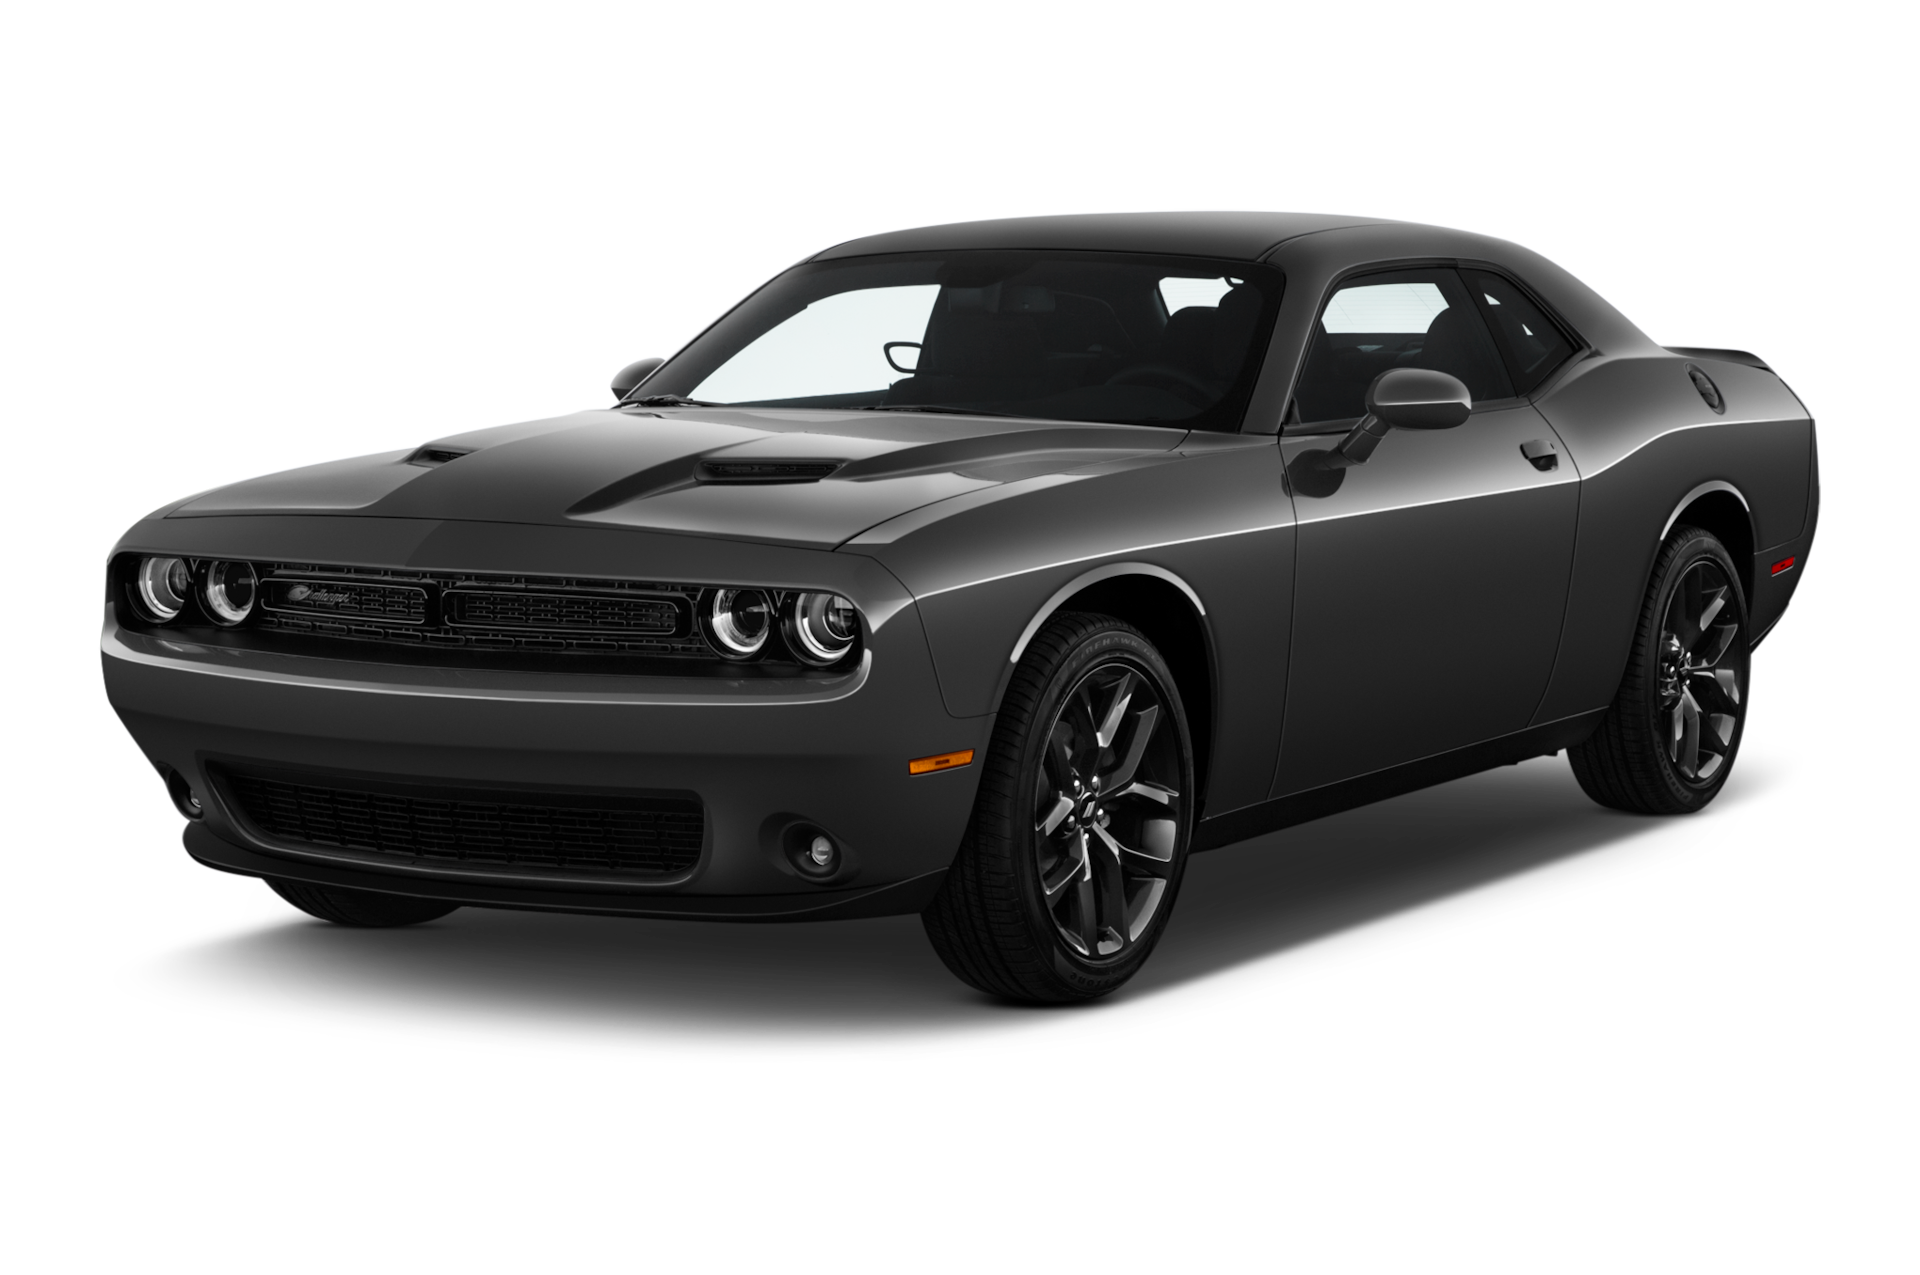 2020 Dodge Challenger Prices, Reviews, and Photos - MotorTrend